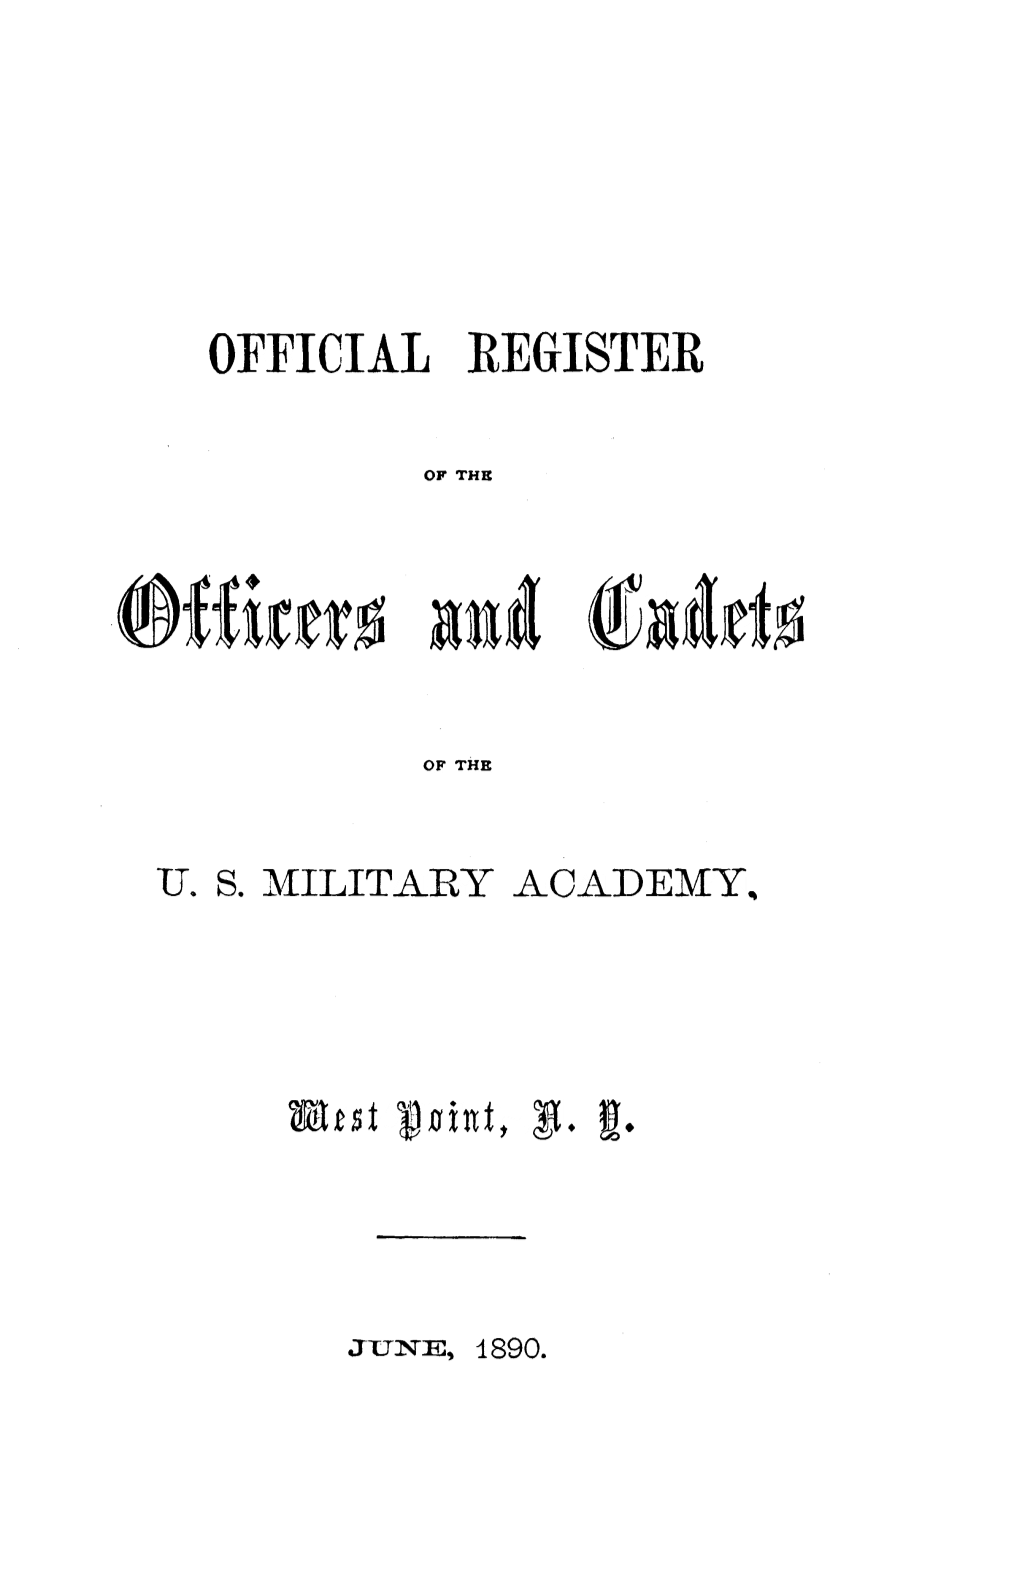 Official Register of the Officers and Cadets of the U.S. Military Academy, West Point, N.Y. 1890